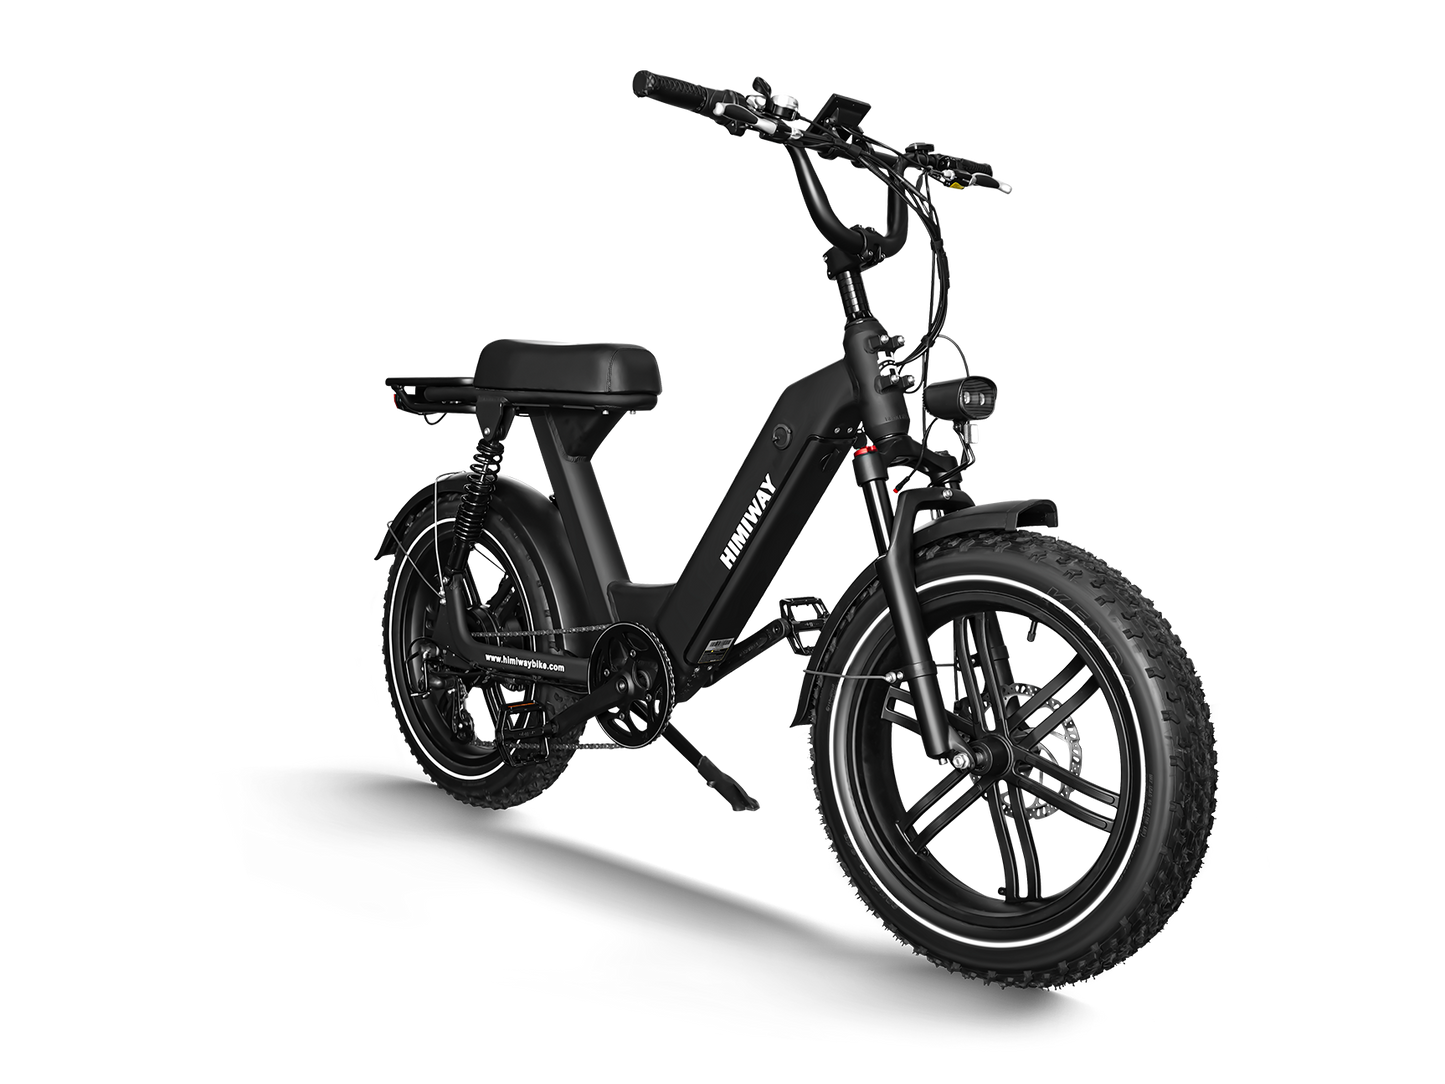 Himiway Escape Pro Moped-Style Electric Bike